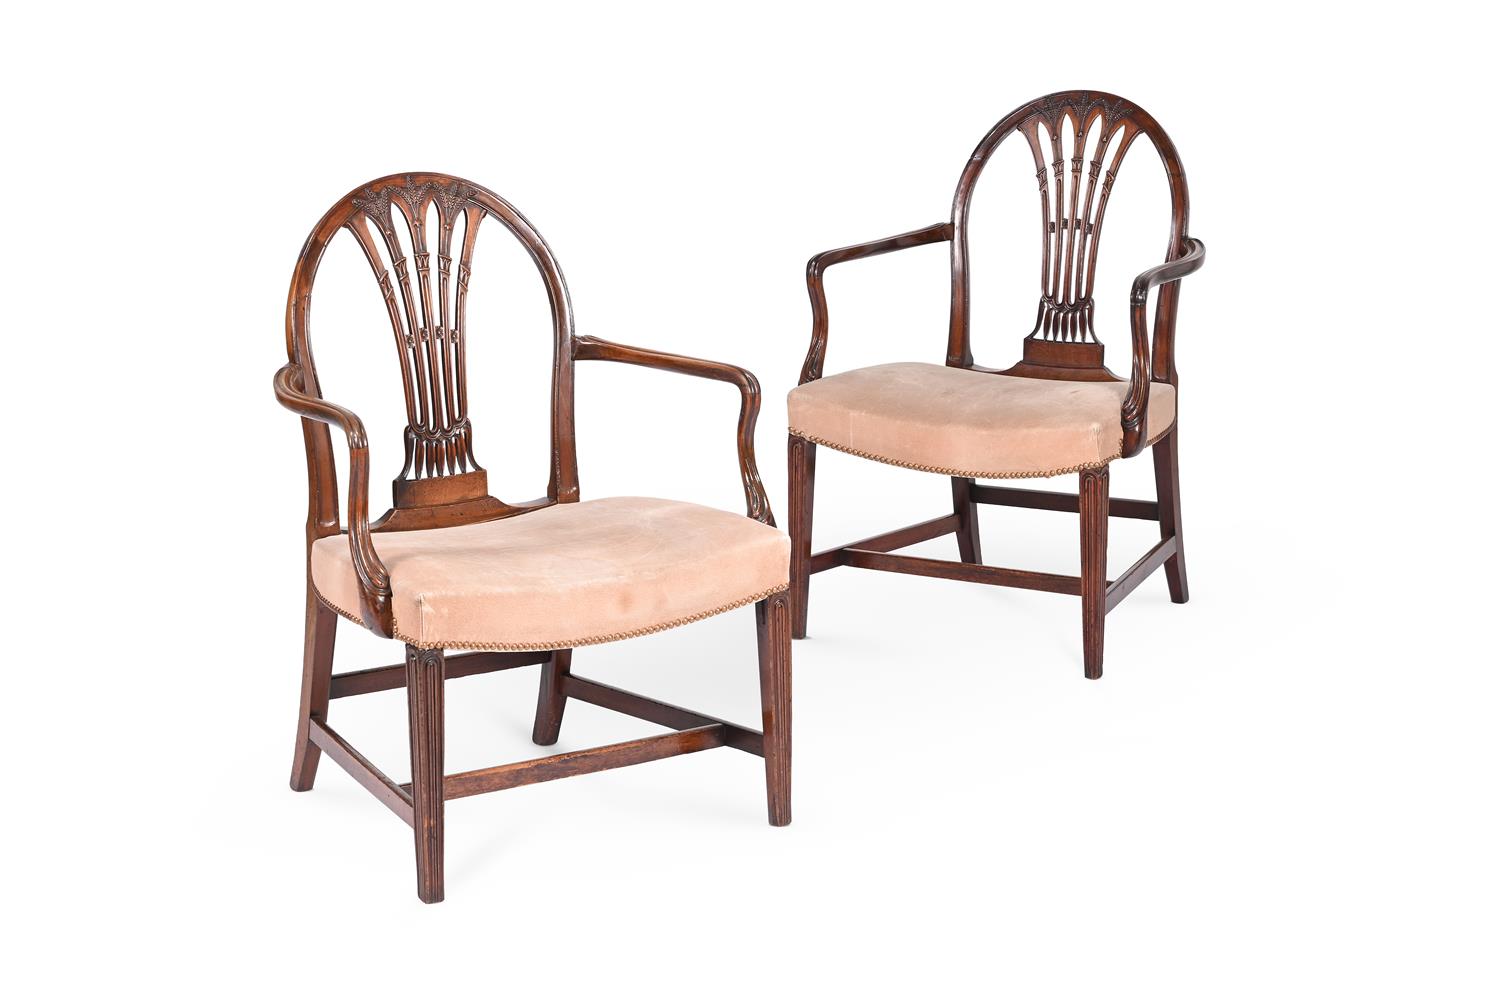 A PAIR OF GEORGE III MAHOGANY OPEN ARMCHAIRS AFTER DESIGNS BY GEORGE HEPPLEWHITE - Image 2 of 2